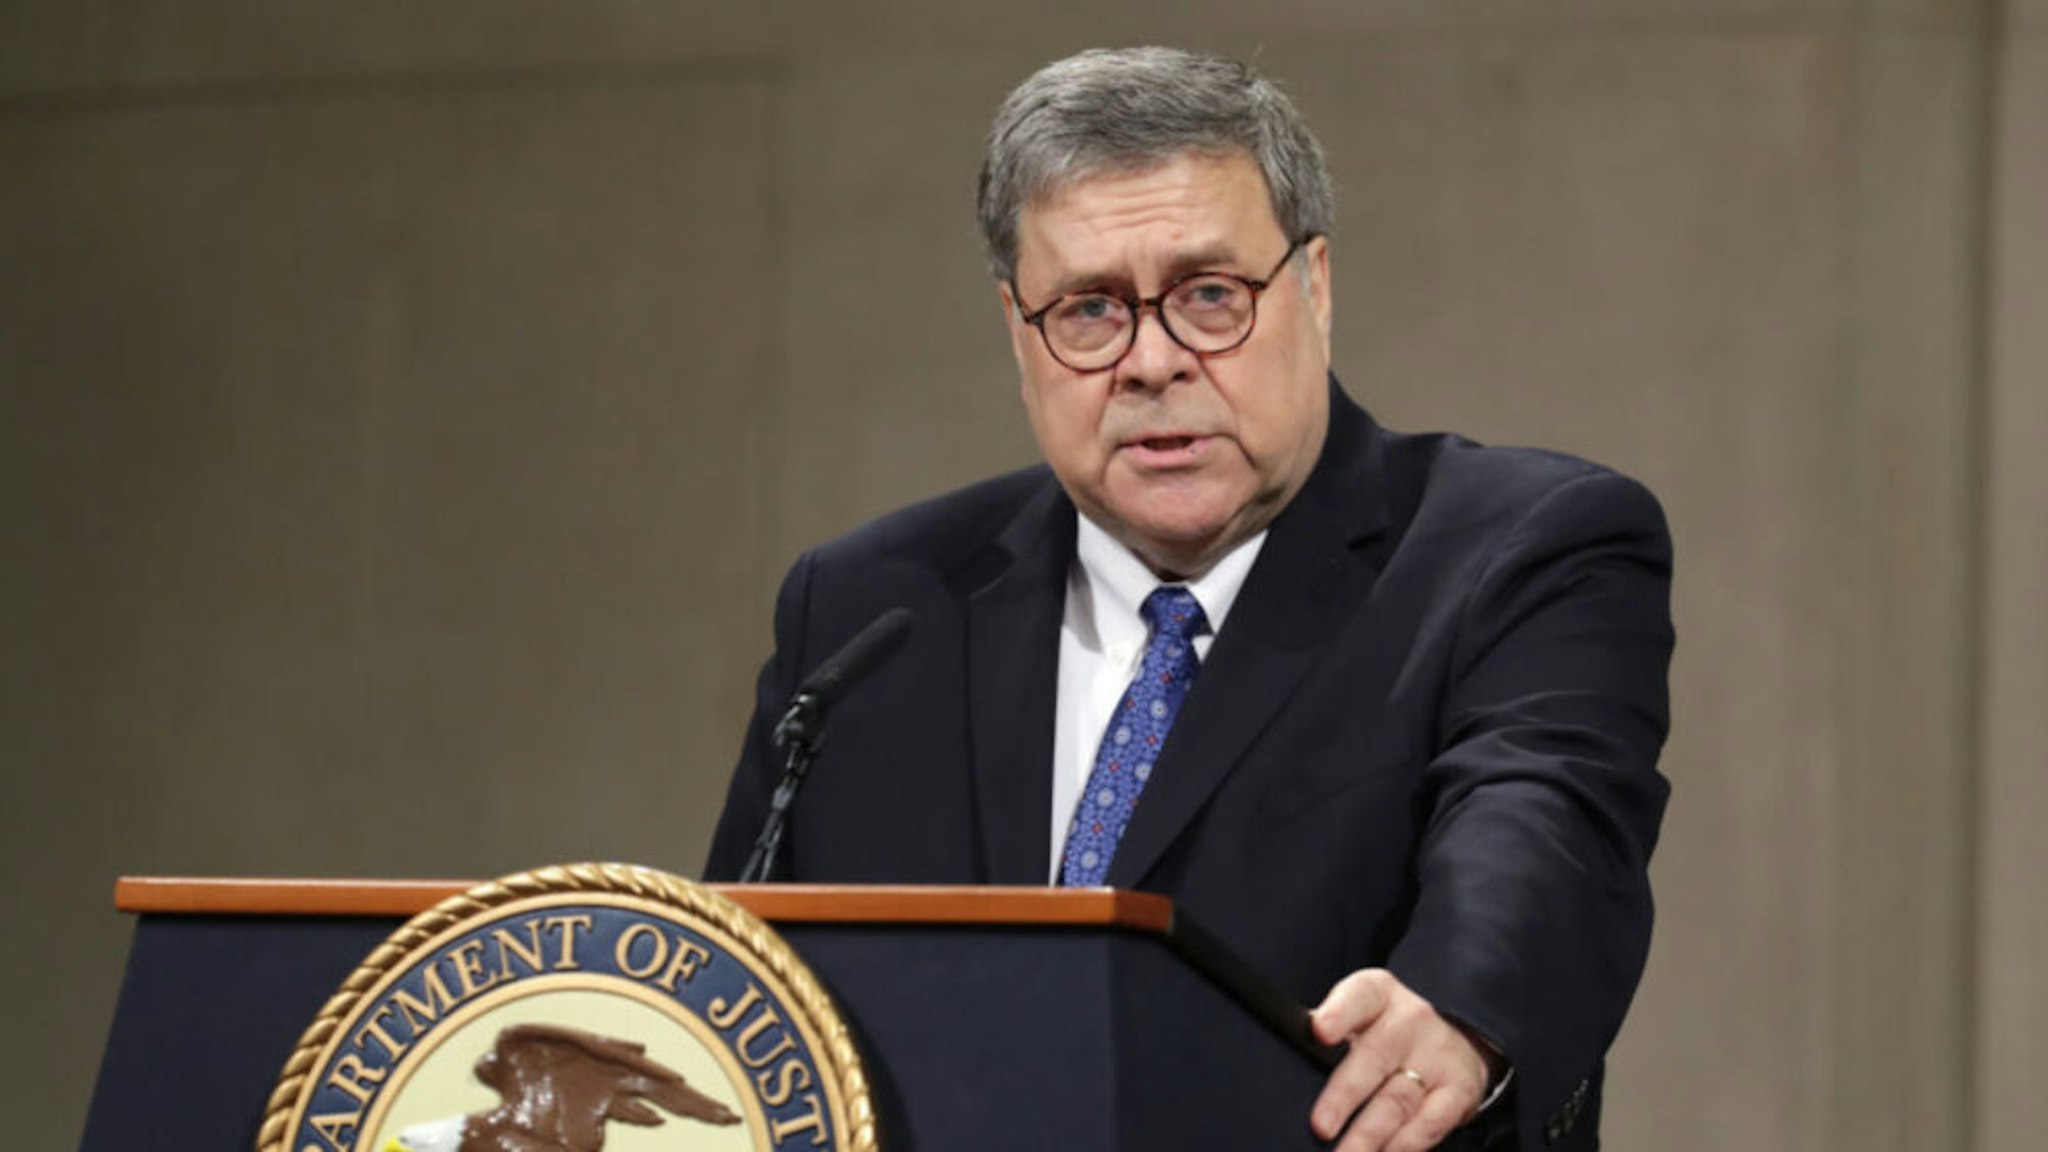 U.S. Attorney General William Barr delivers remarks during a farewell ceremony for Deputy Attorney General Rod Rosenstein at the Robert F. Kennedy Main Justice Building May 09, 2019 in Washington, DC.